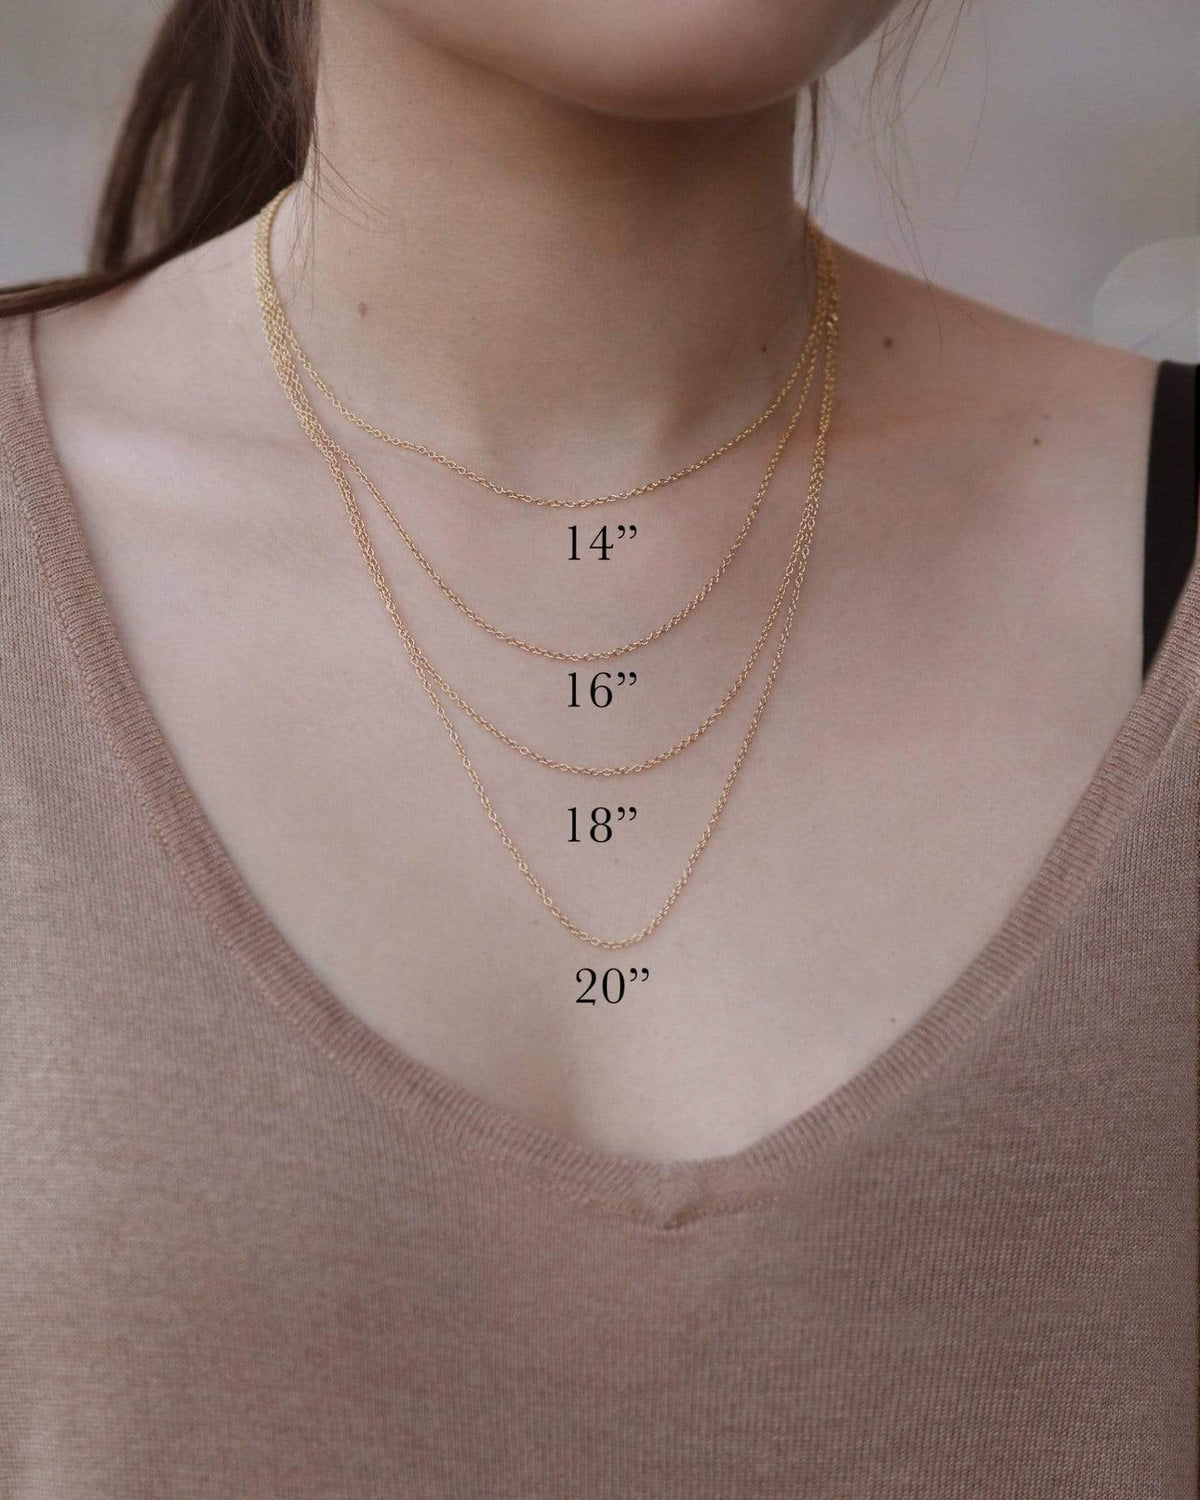 MaeMae Necklace length guide.